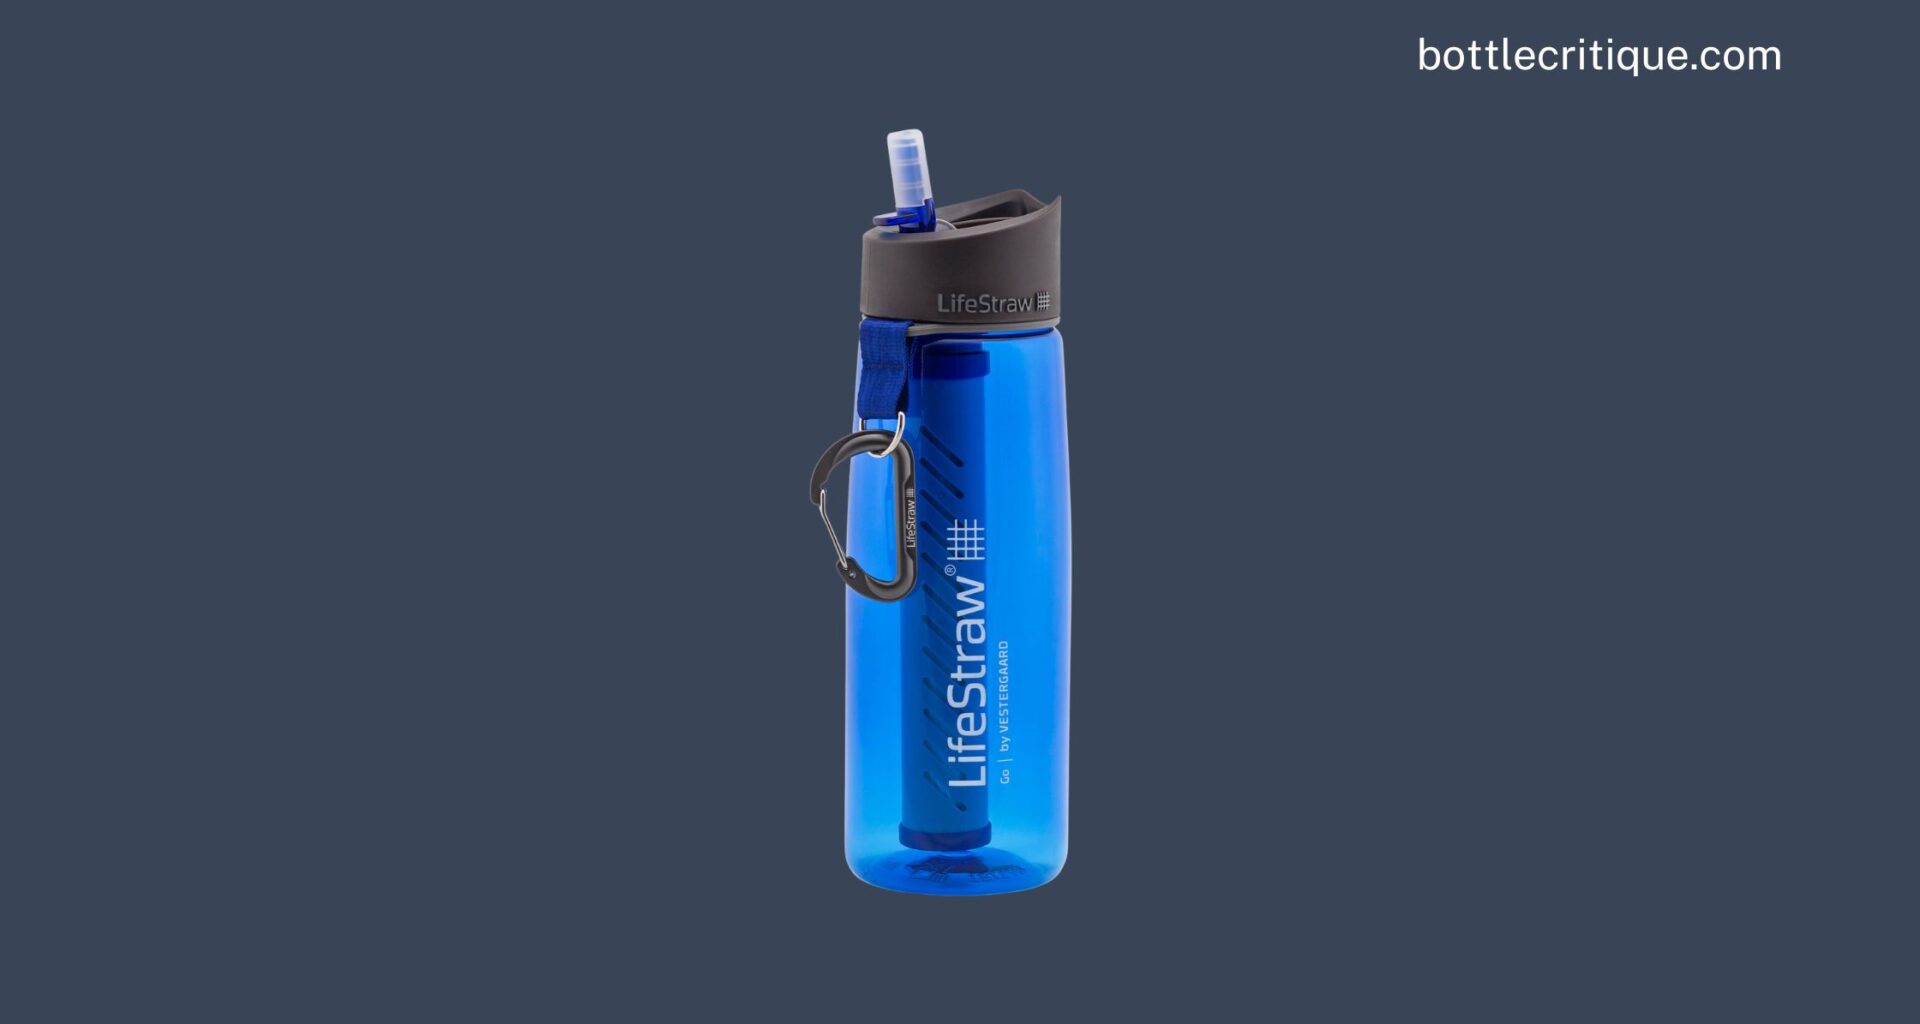 How to Wash Lifestraw Water Bottle?